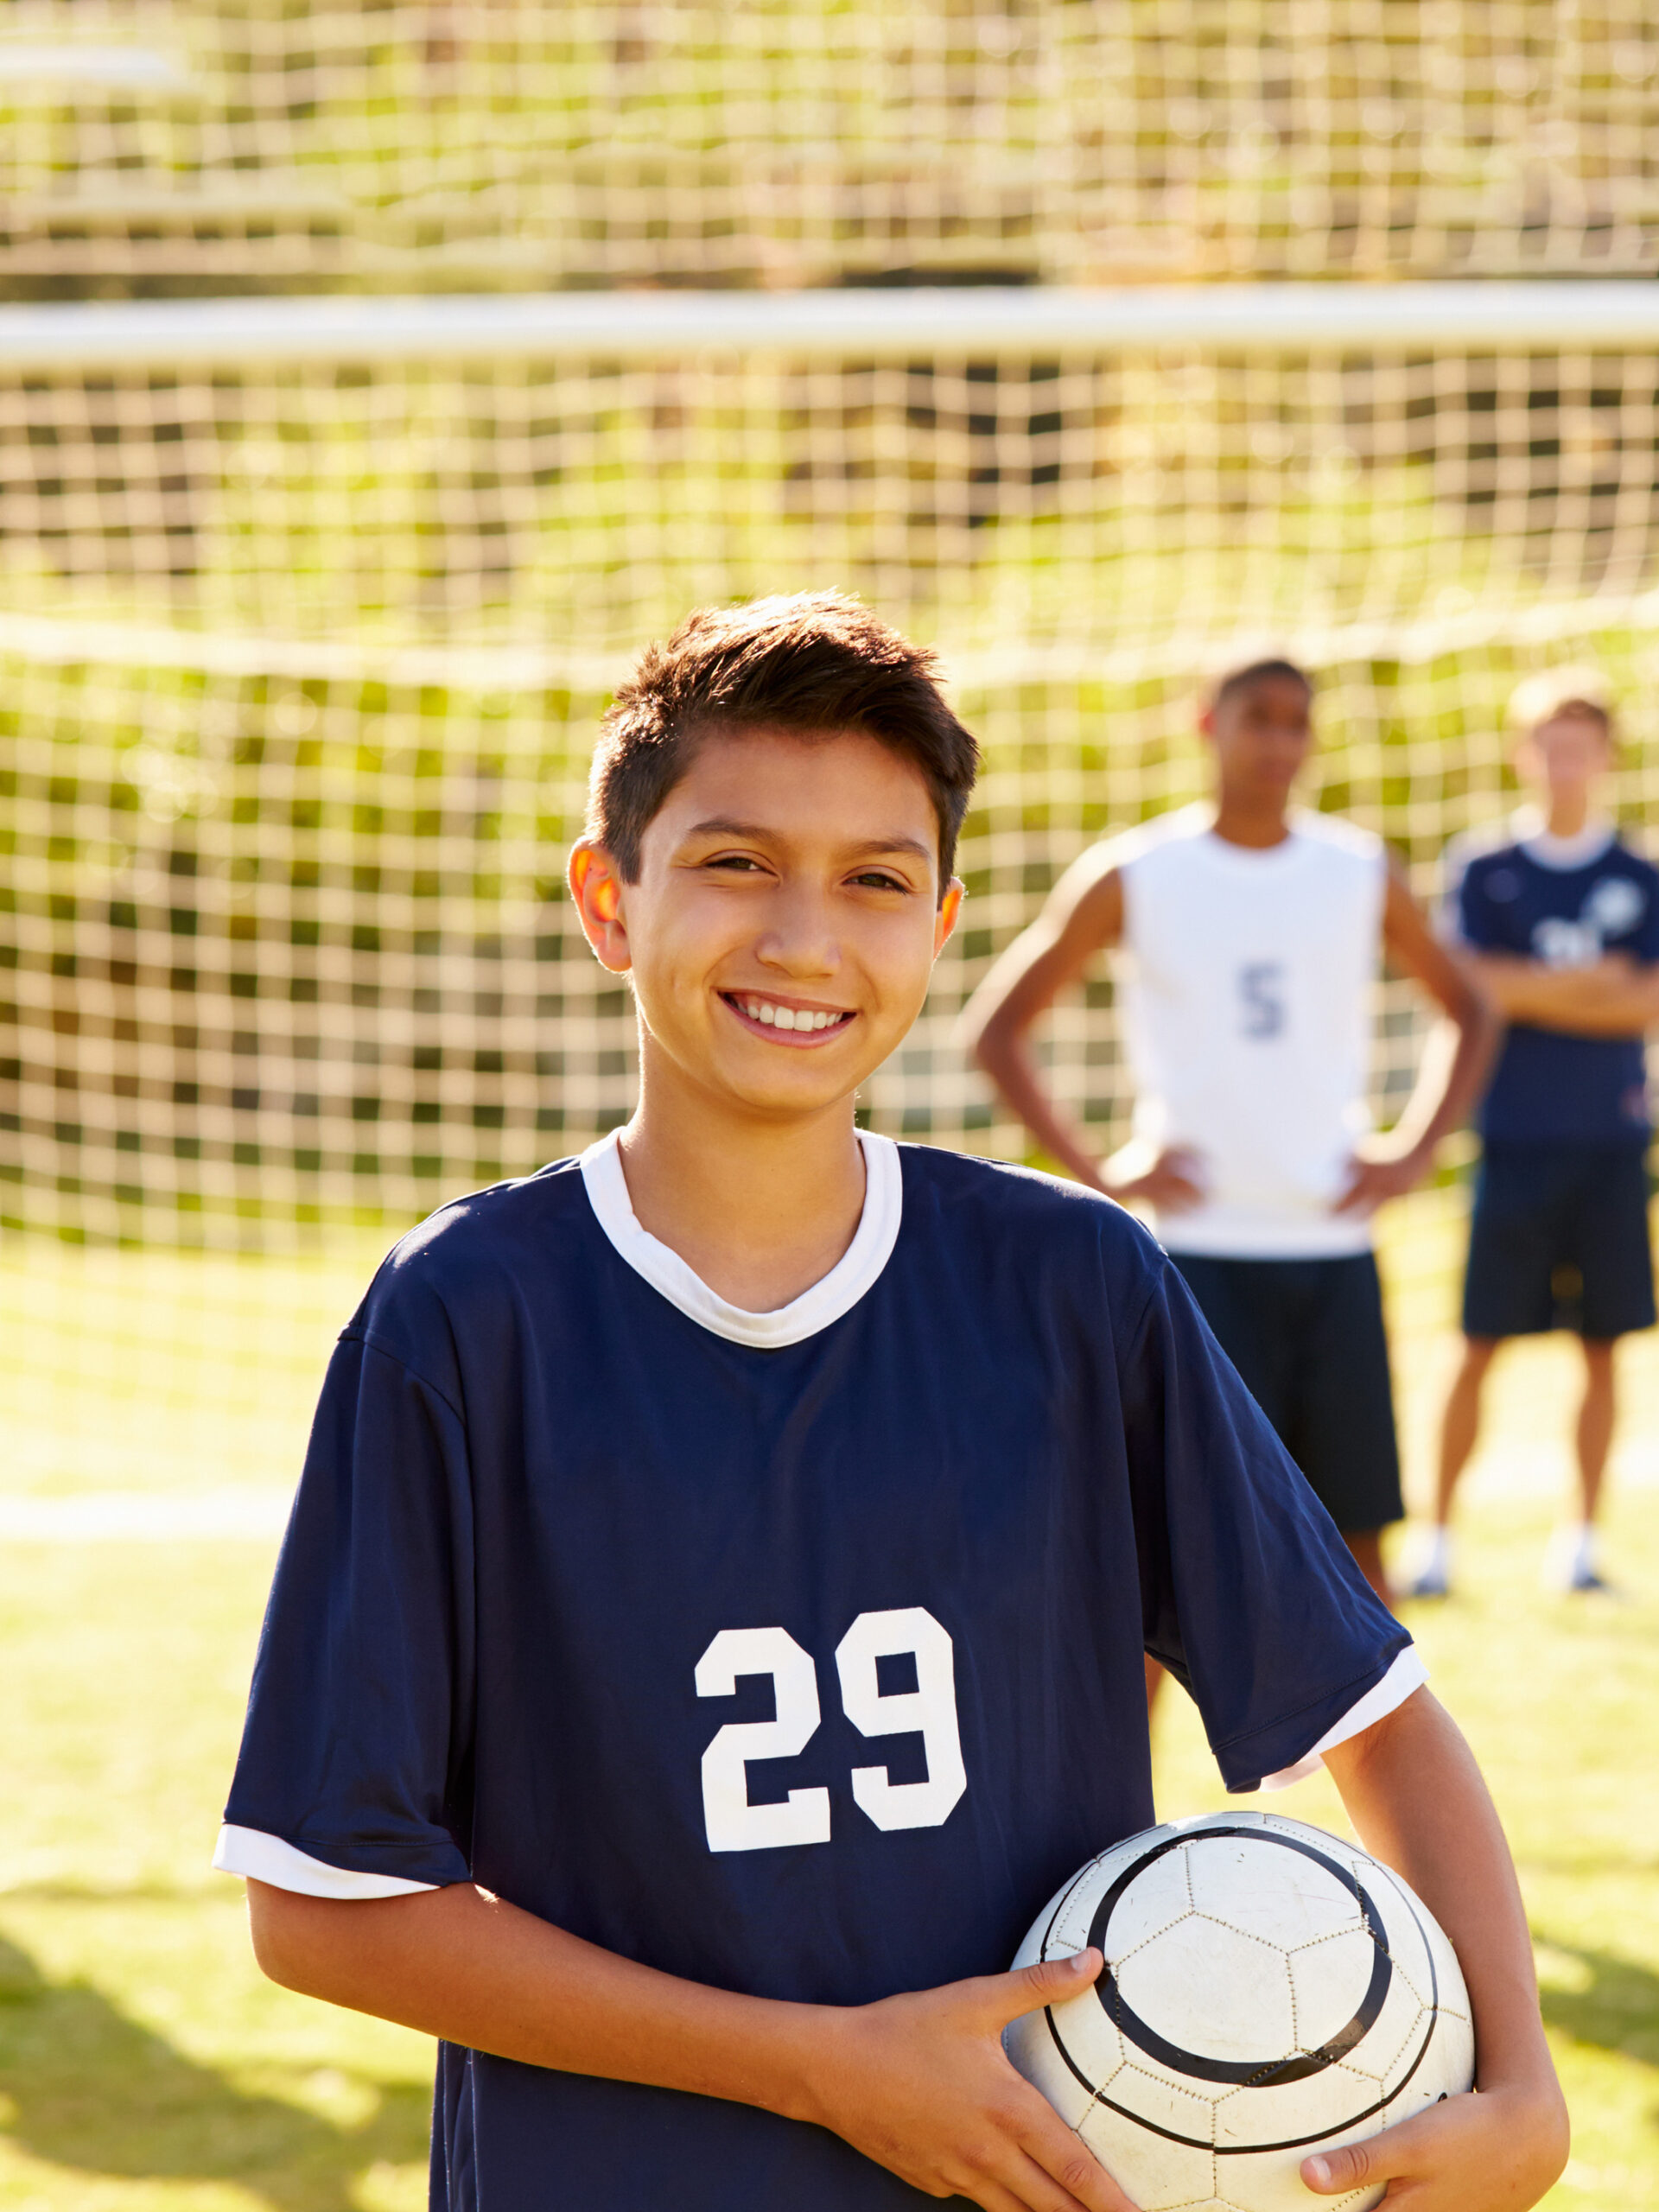 Teen poses with soccer ball - CHOC's advice for preventing athlete burnout